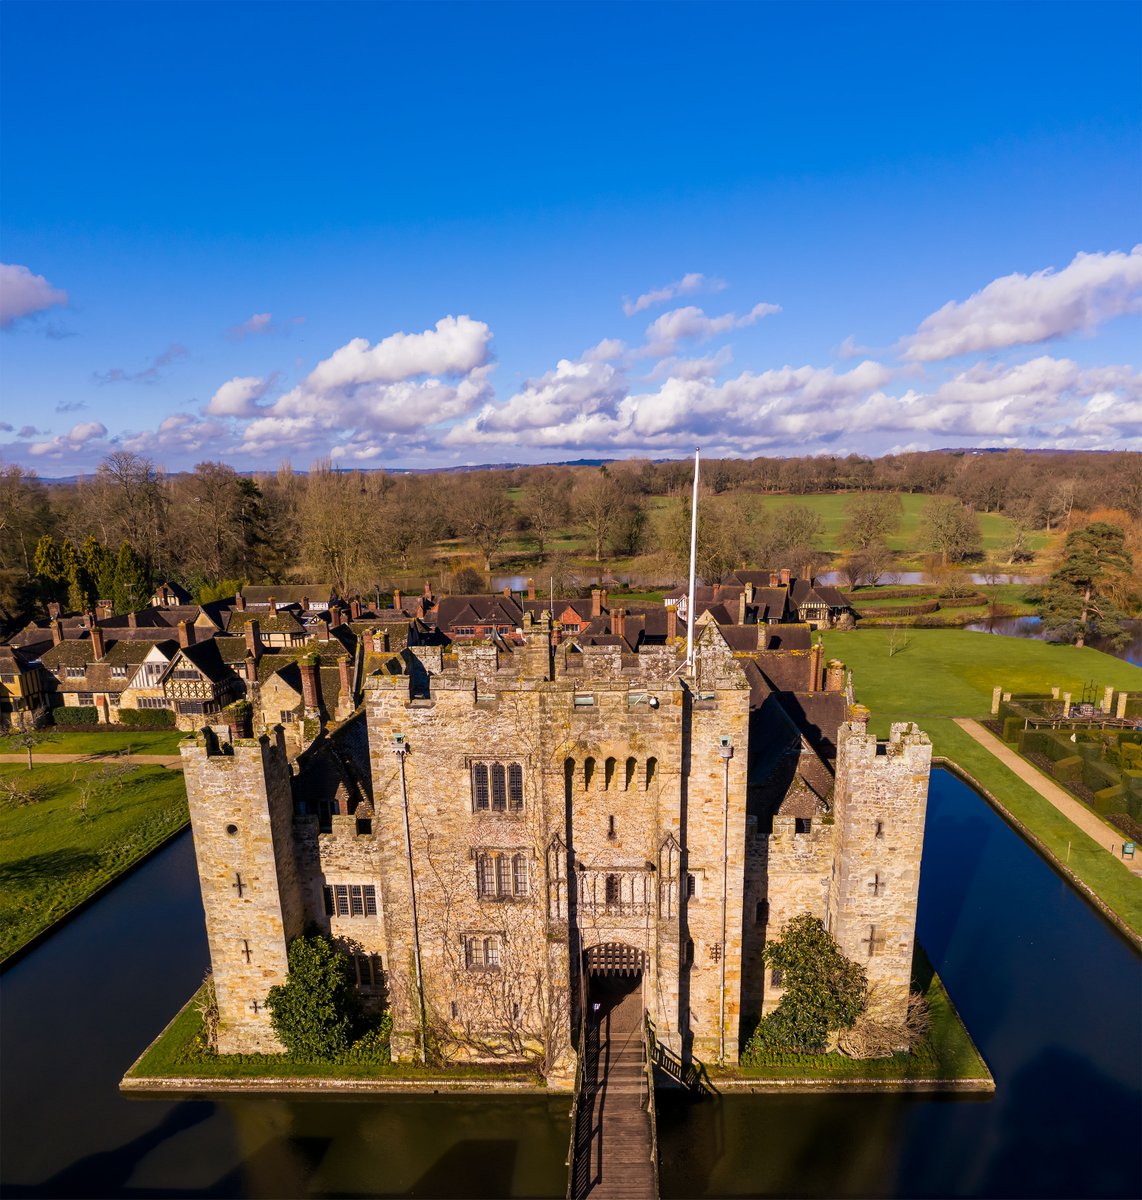 Would you like to work at Hever Castle? 

We are recruiting for Visitor Experience Assistants to work in the Castle & the grounds.

Discover more here: bit.ly/JobsatHever

#JobsInKent #KentJobs #NewJob #Kent #HeverCastle